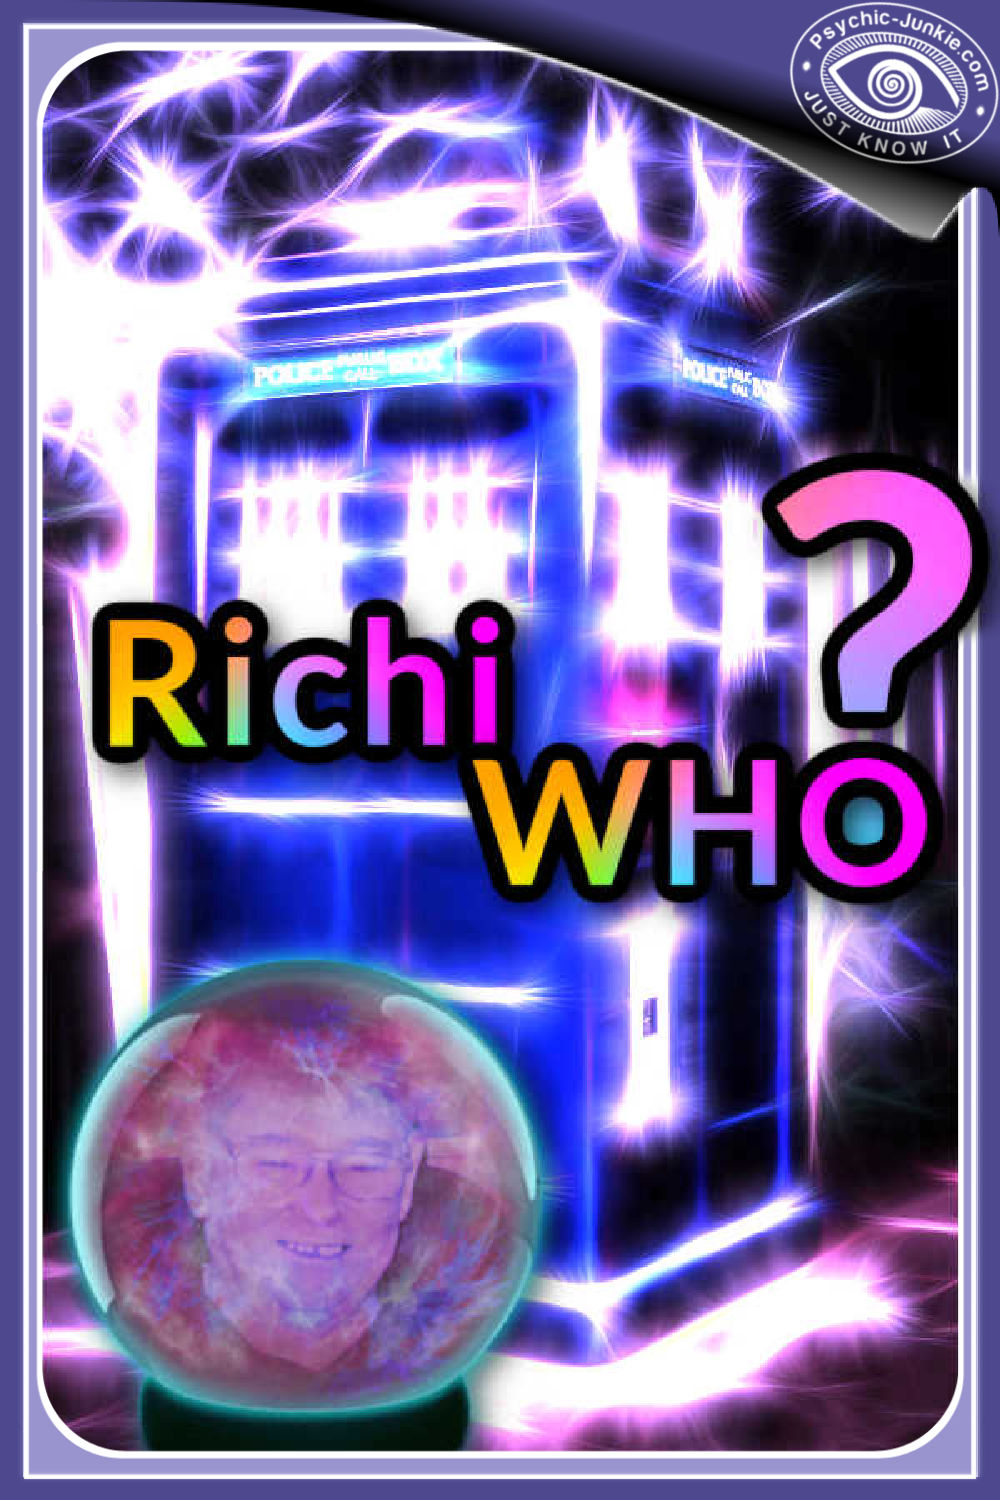 Richi Who - My Psychic Guide